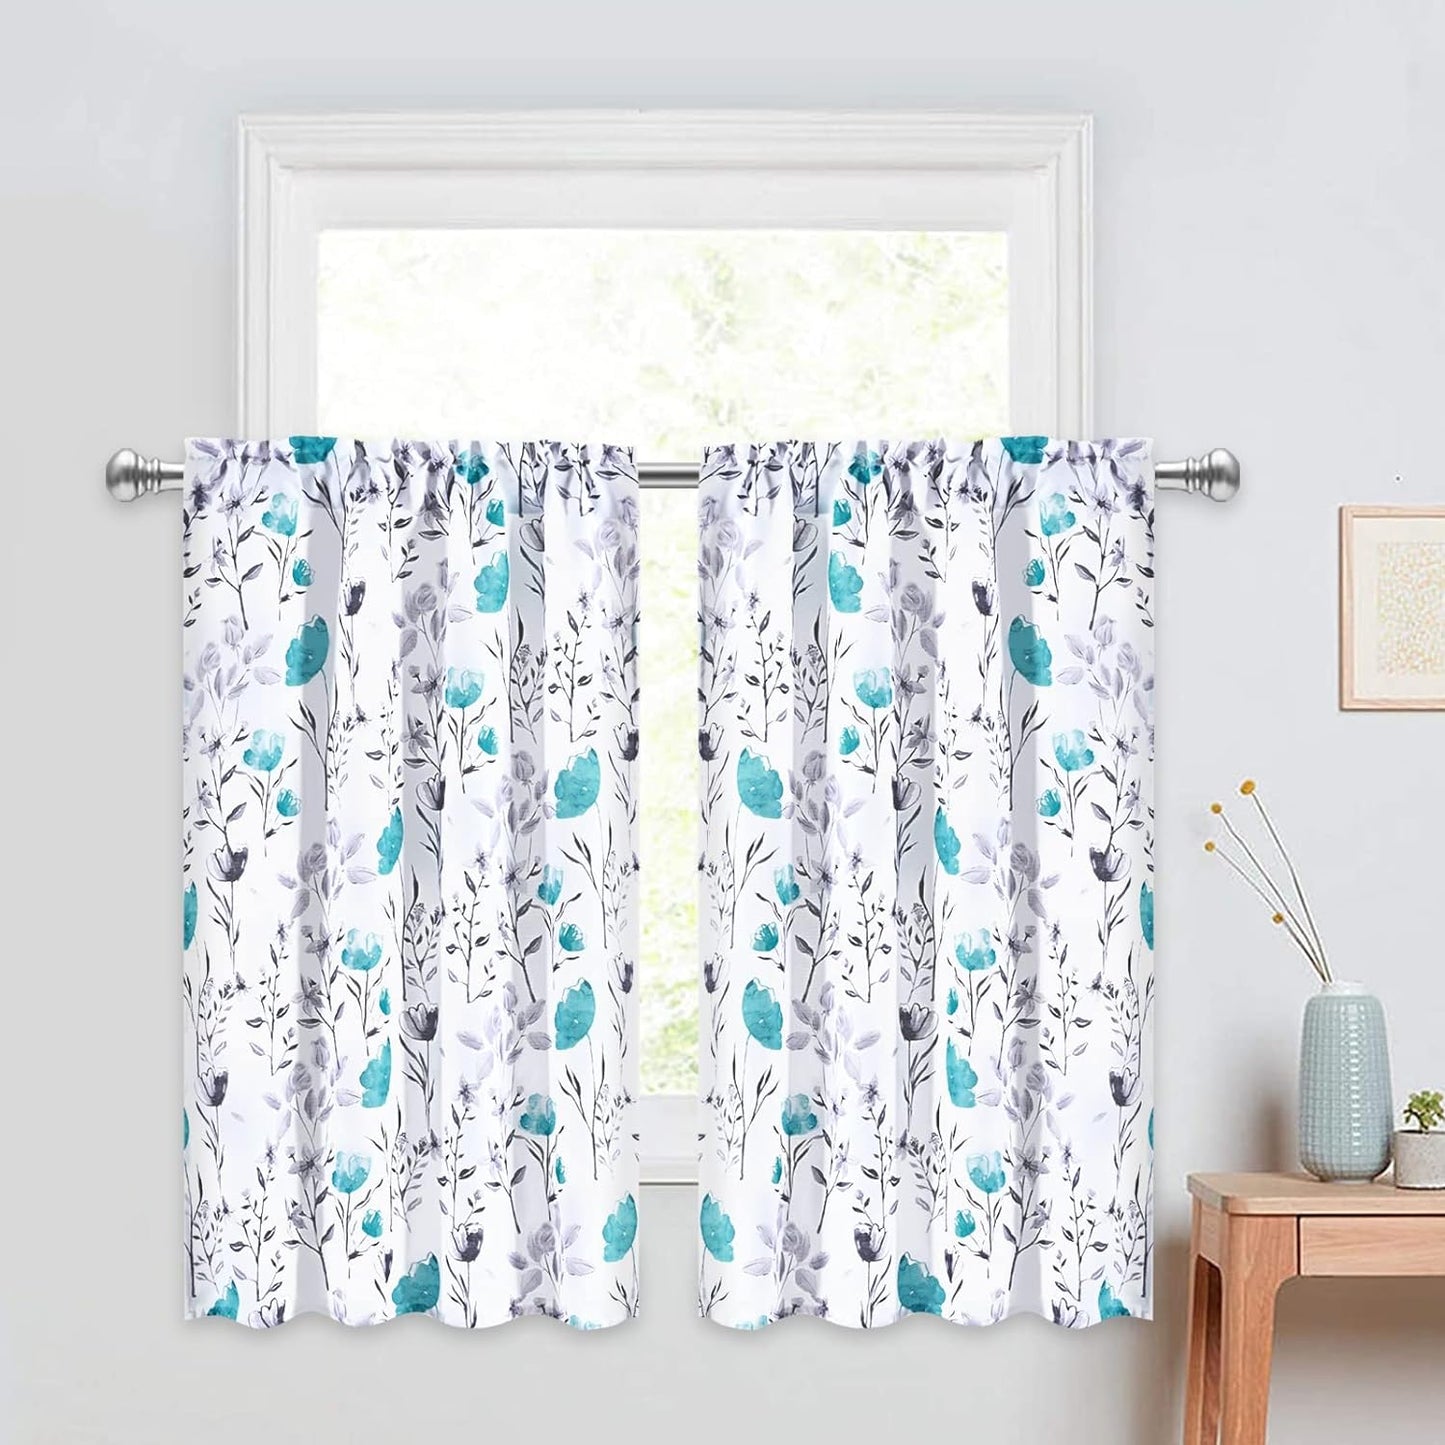 Likiyol Floral Kithchen Curtains 36 Inch Watercolor Flower Leaves Tier Curtains, Yellow and Gray Floral Cafe Curtains, Rod Pocket Small Window Curtain for Cafe Bathroom Bedroom Drapes  Likiyol Teal 36"L X 26"W 